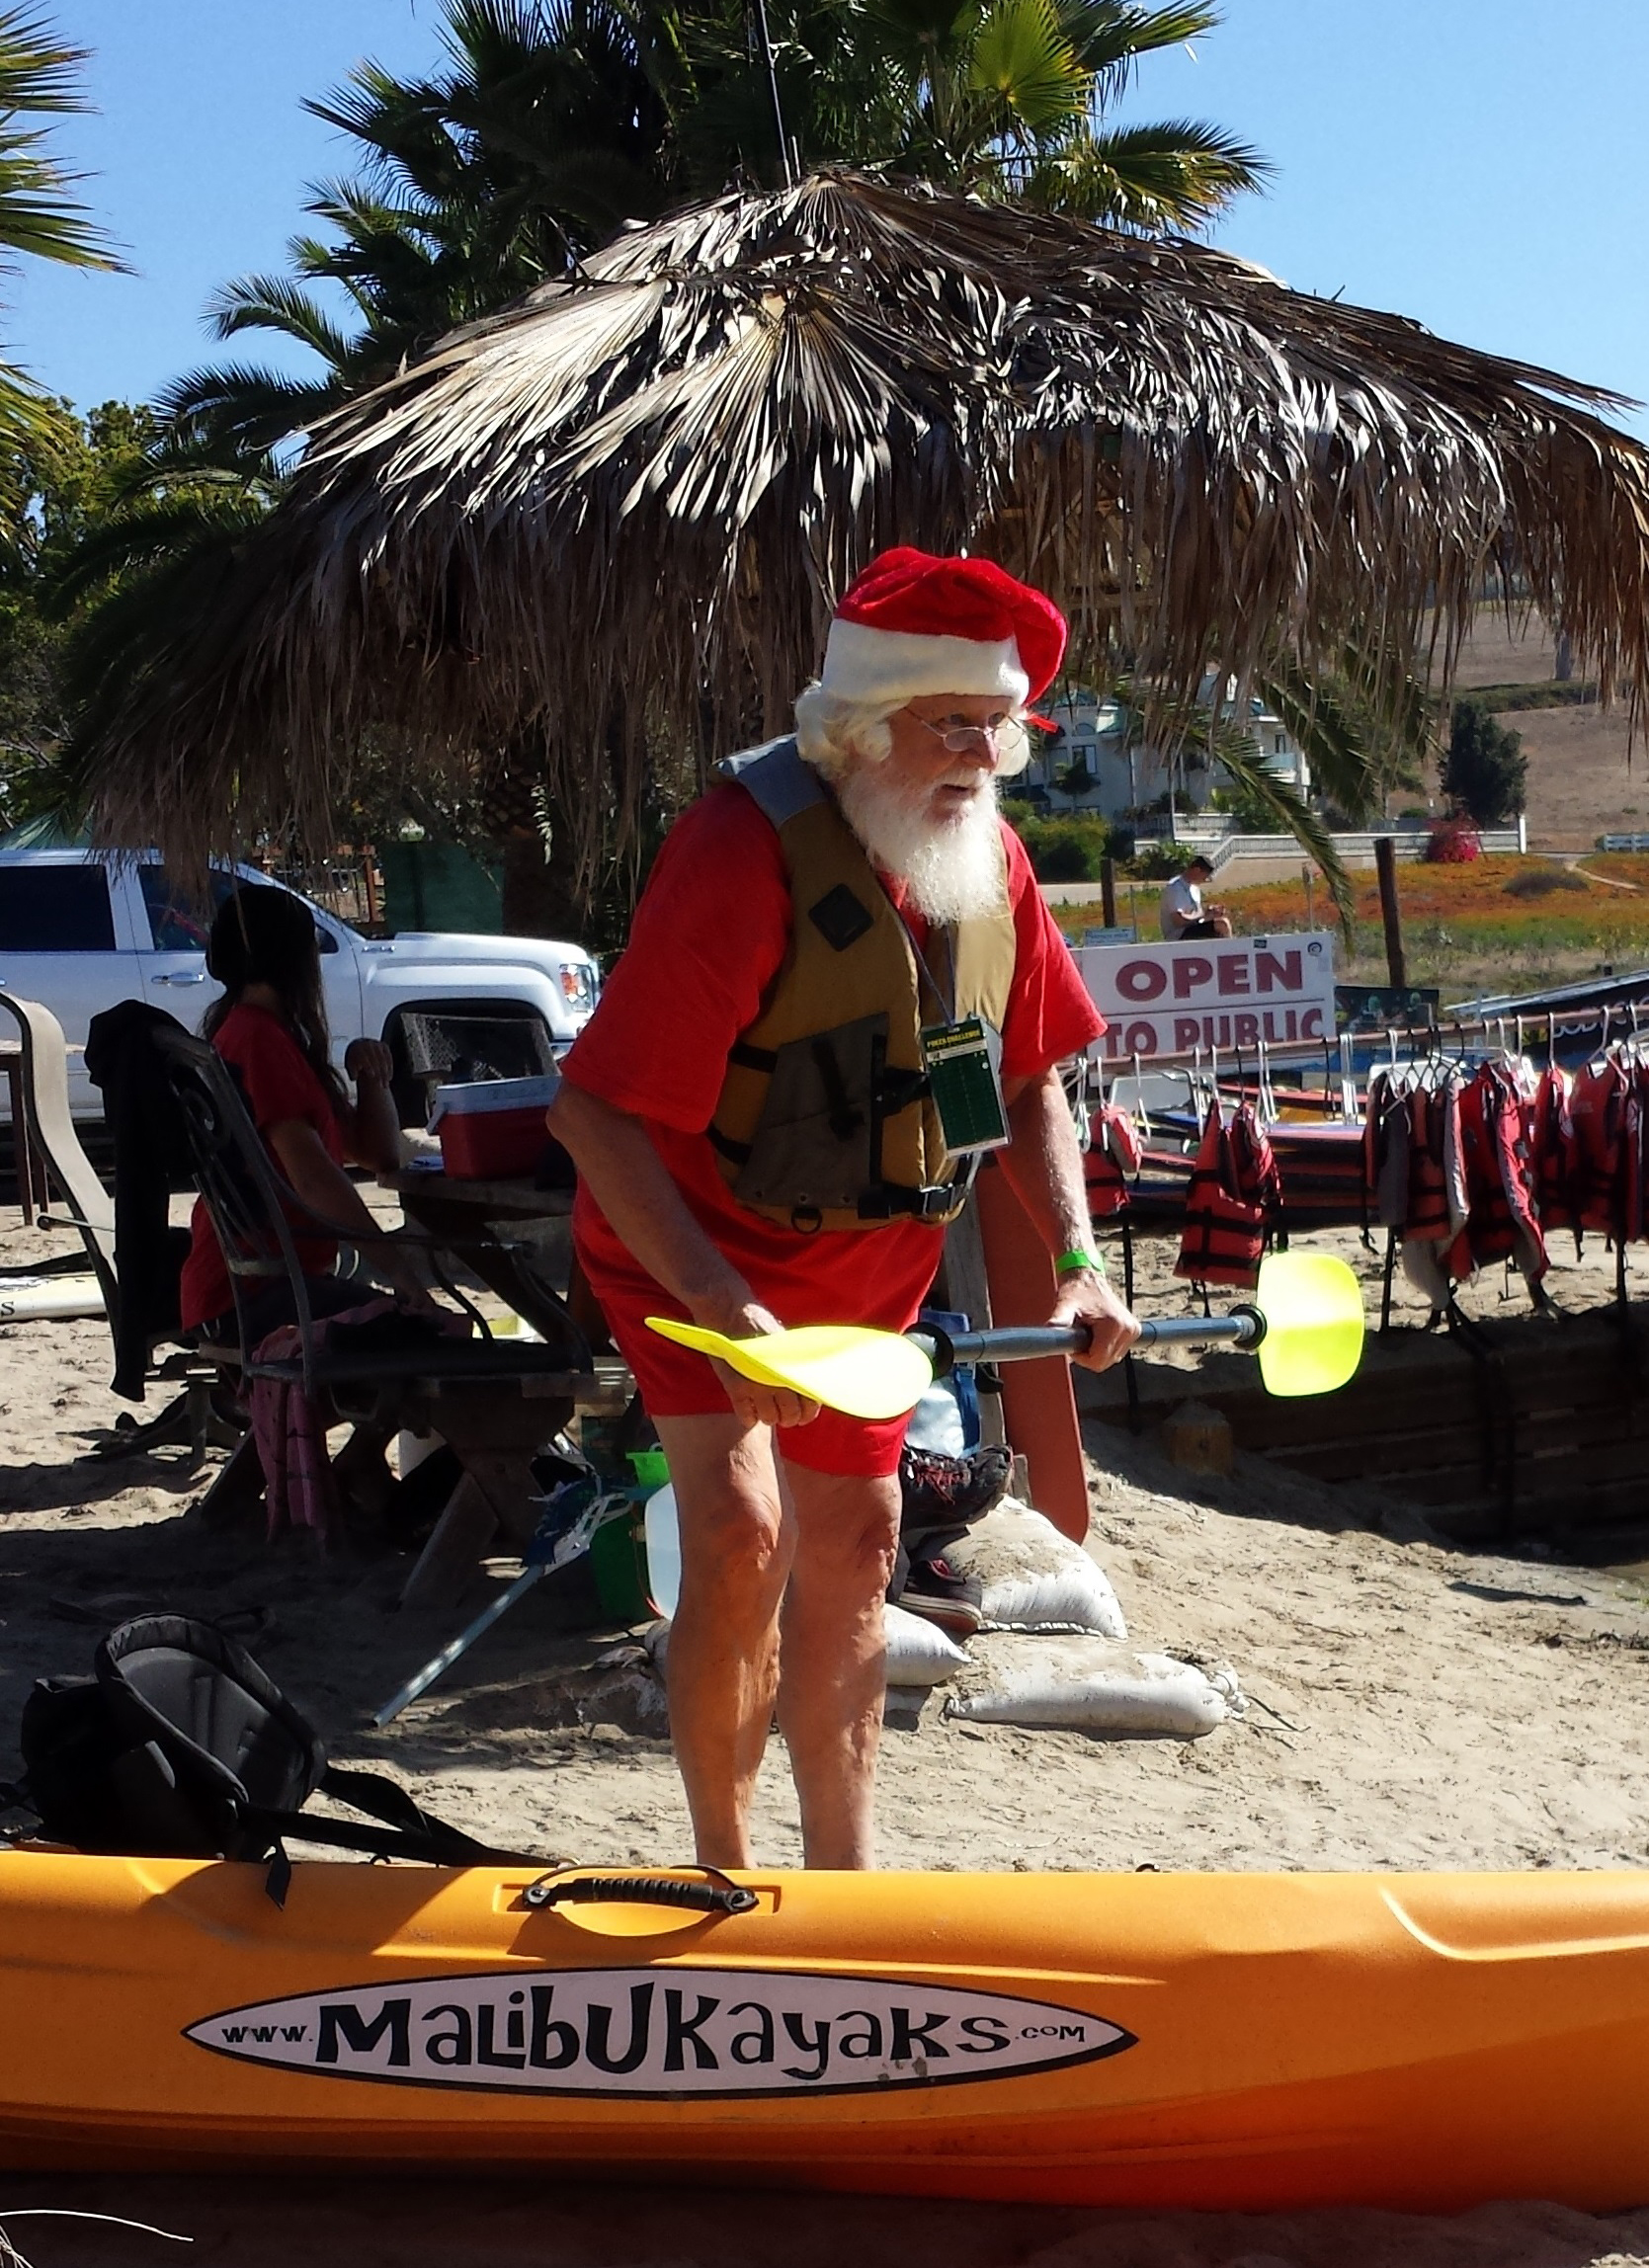 Now we know where Santa goes to hide out, relax, and have fun after Christmas! Carlsbad’s mild climate makes it a year-round destination, and its lagoons provide safe kayaking. Photo courtesy Agua Hedionda Lagoon Discovery Center.